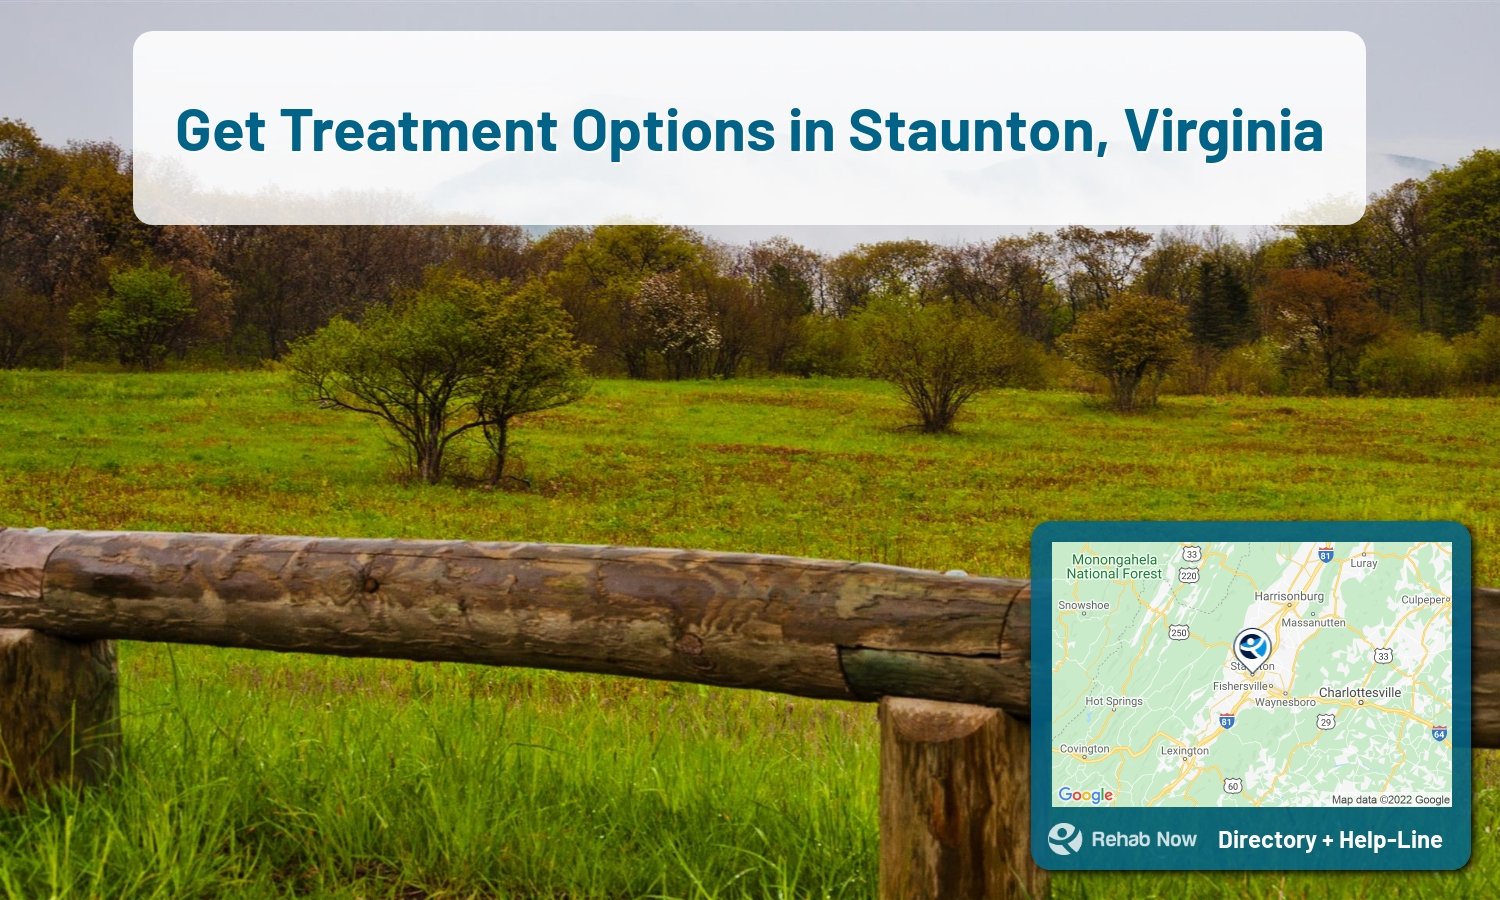 Our experts can help you find treatment now in Staunton, Virginia. We list drug rehab and alcohol centers in Virginia.